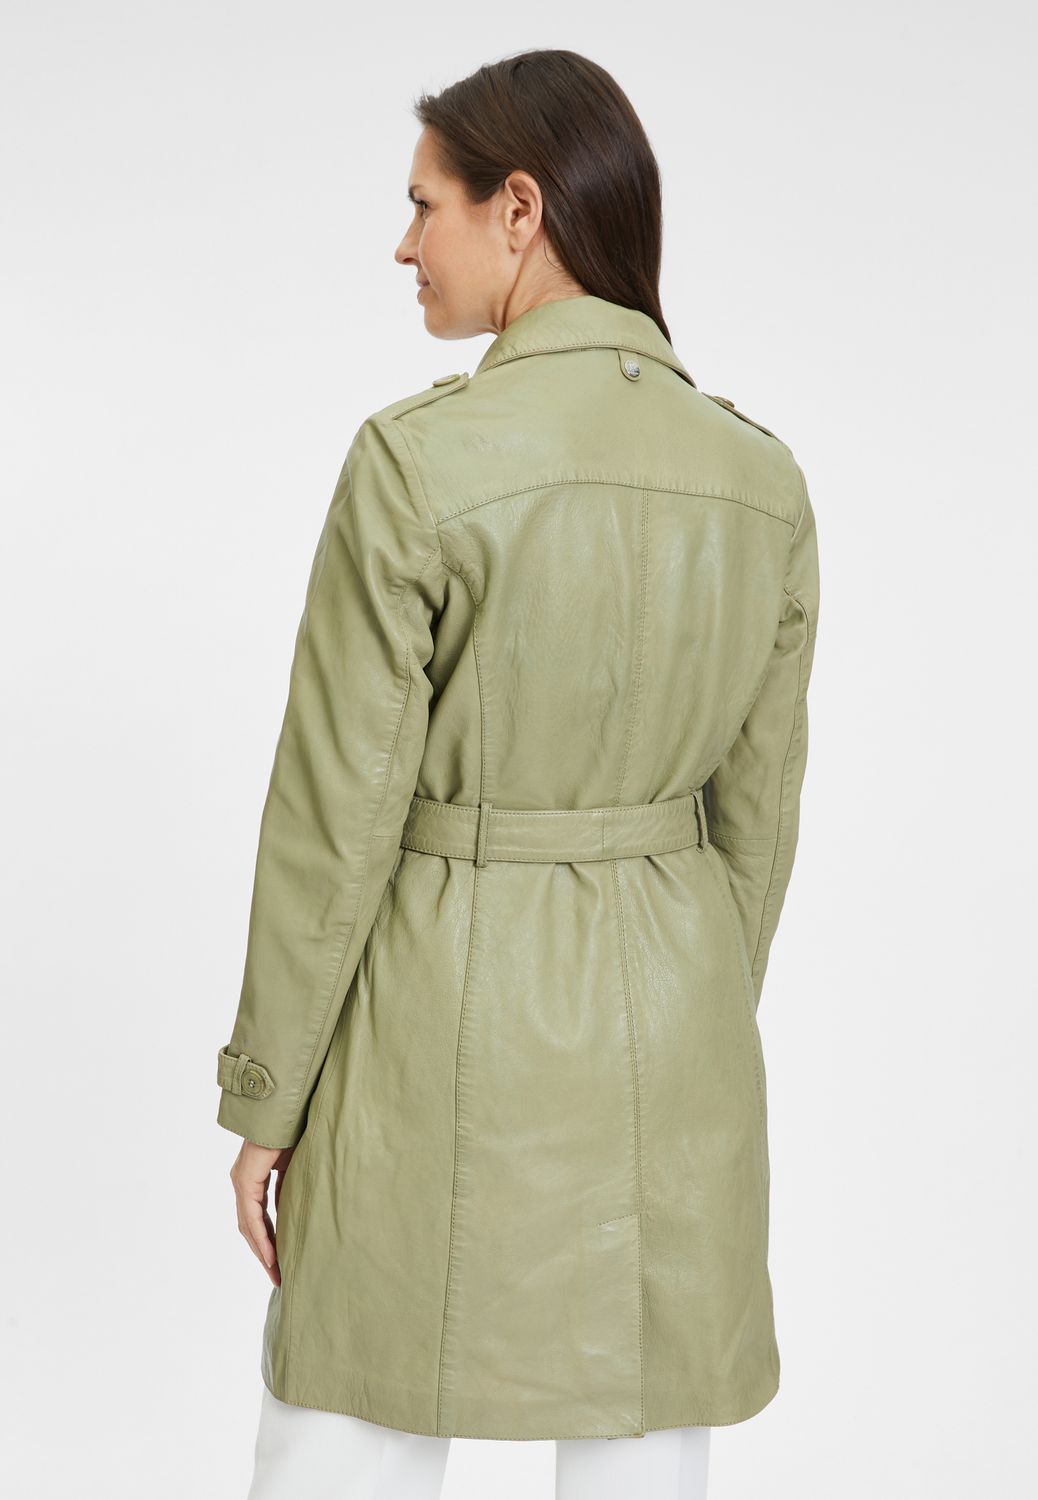 GWLaily S24 light olive